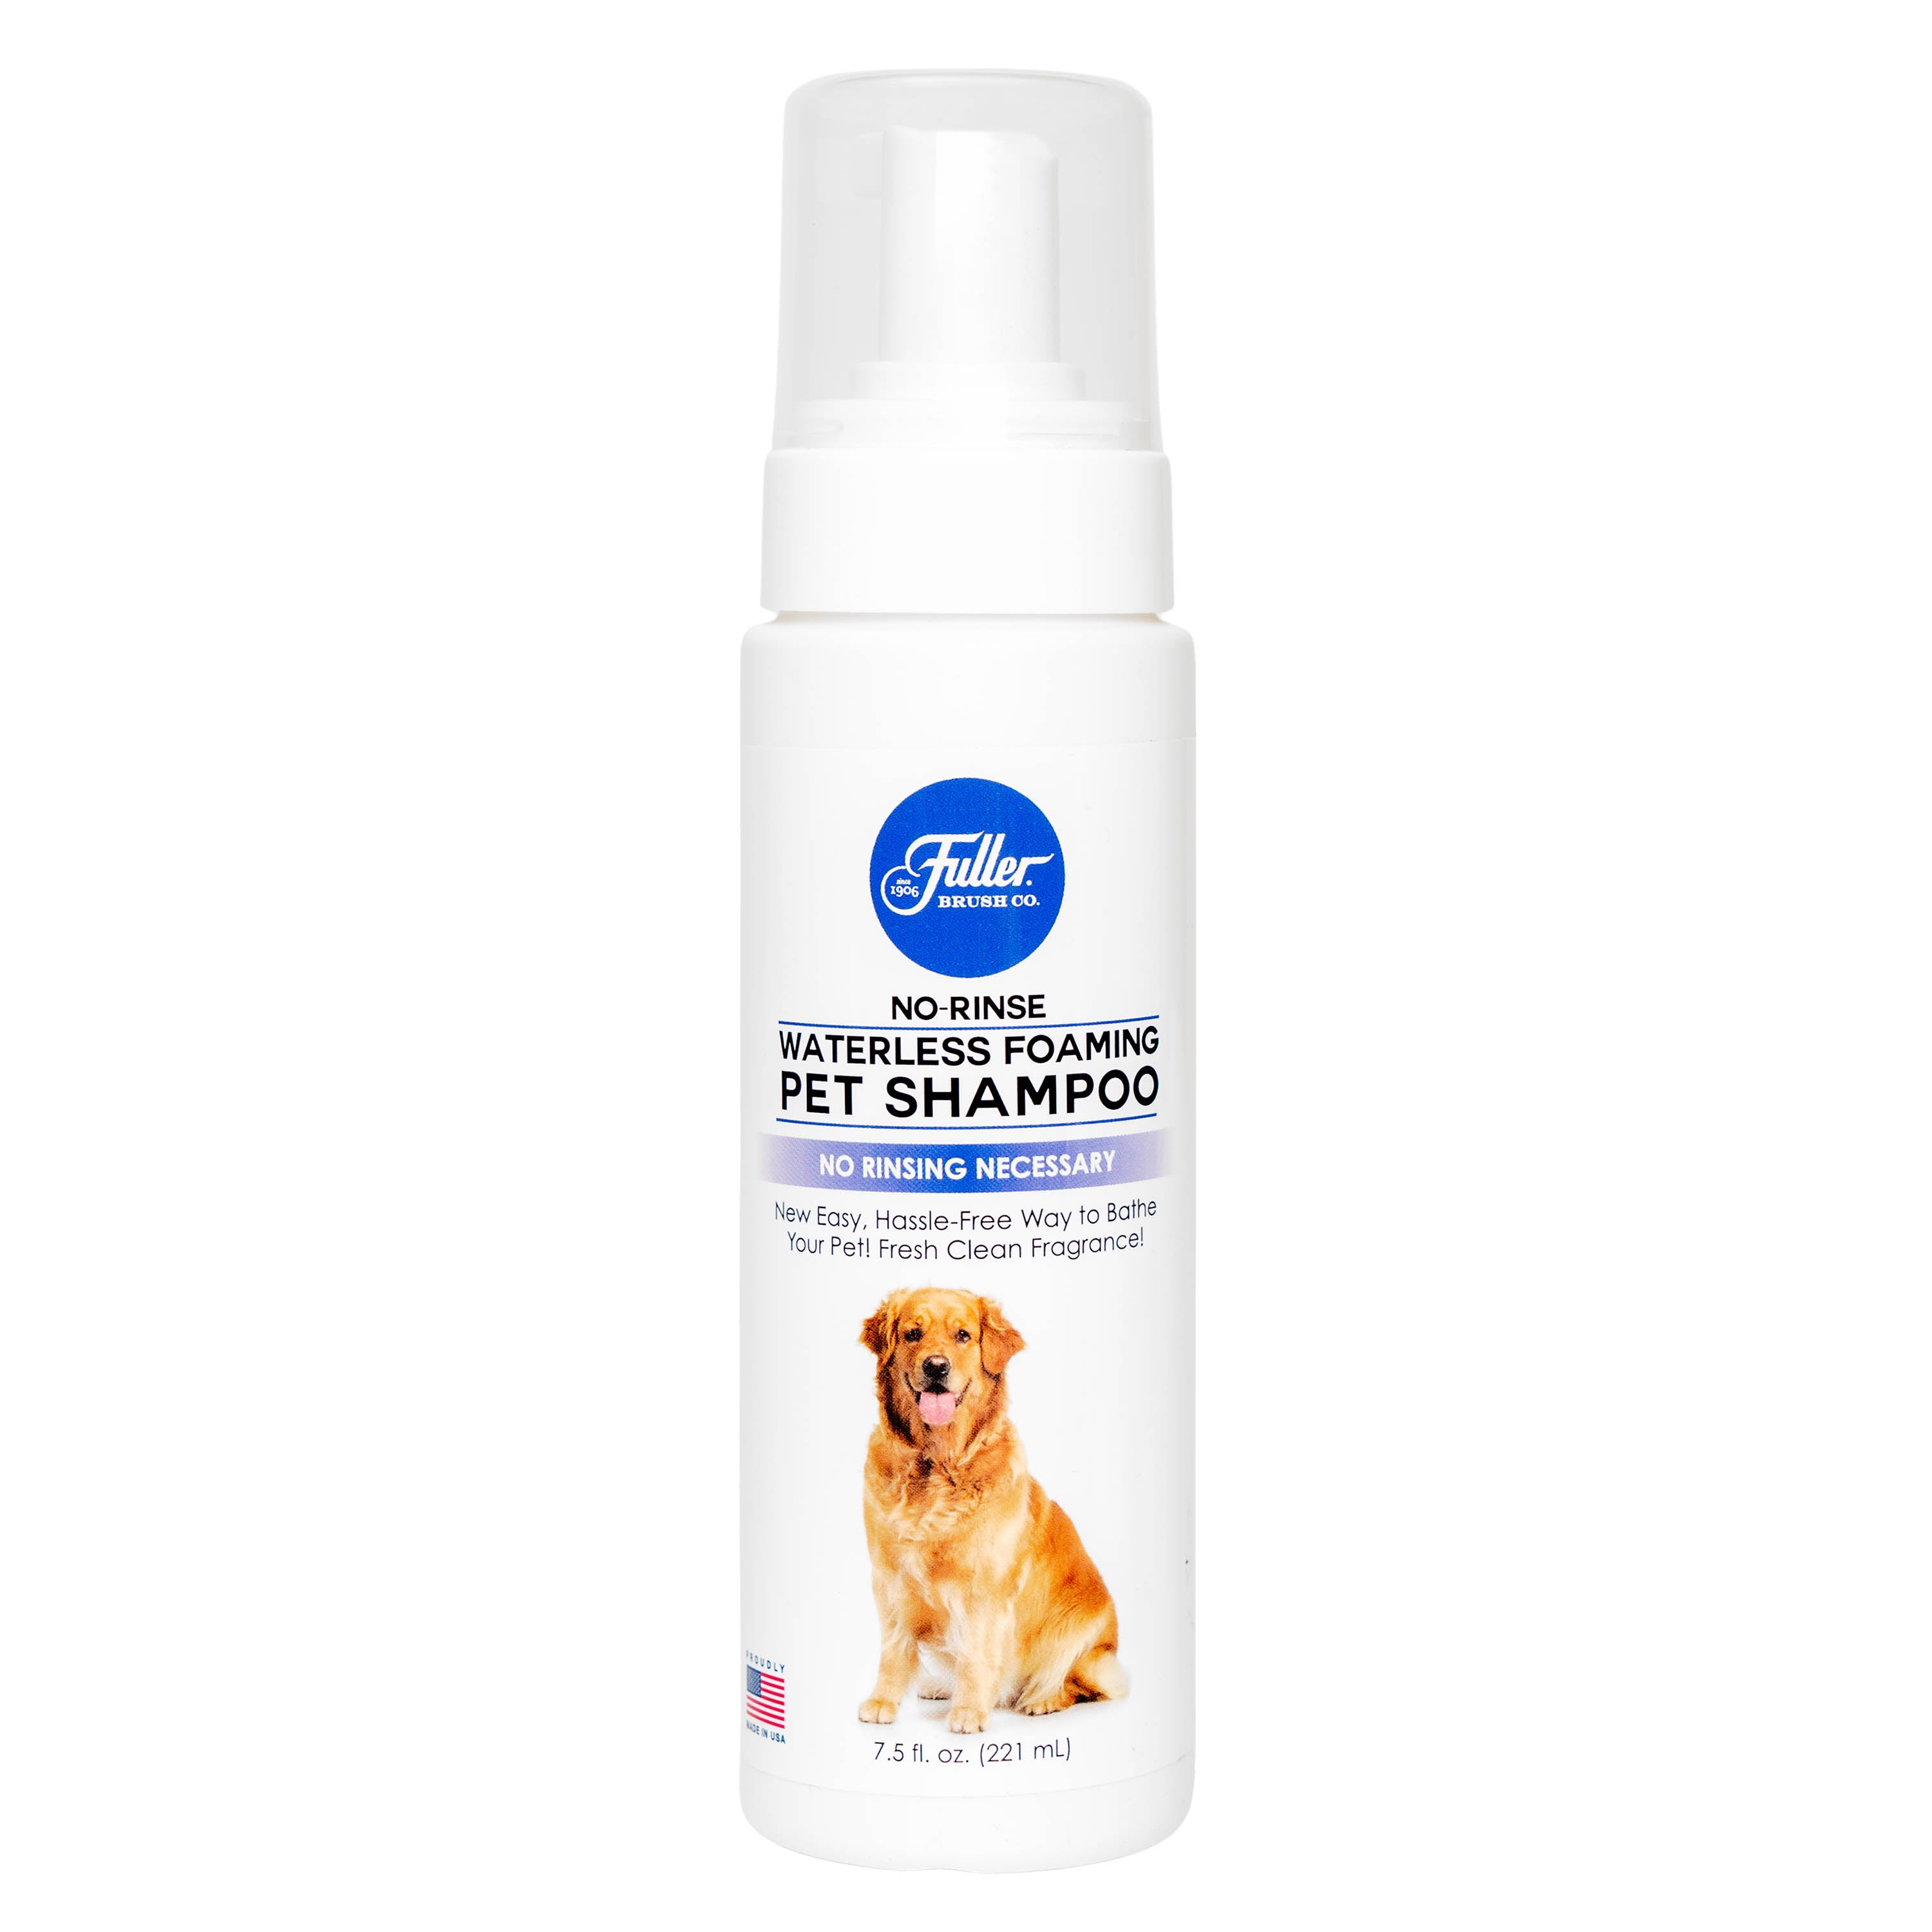 Waterless No-Rinse Foaming Pet Shampoo For Dogs– Cleans, Conditions & Moisturizes (7.5 fl. oz. Bottle with Foaming Pump)